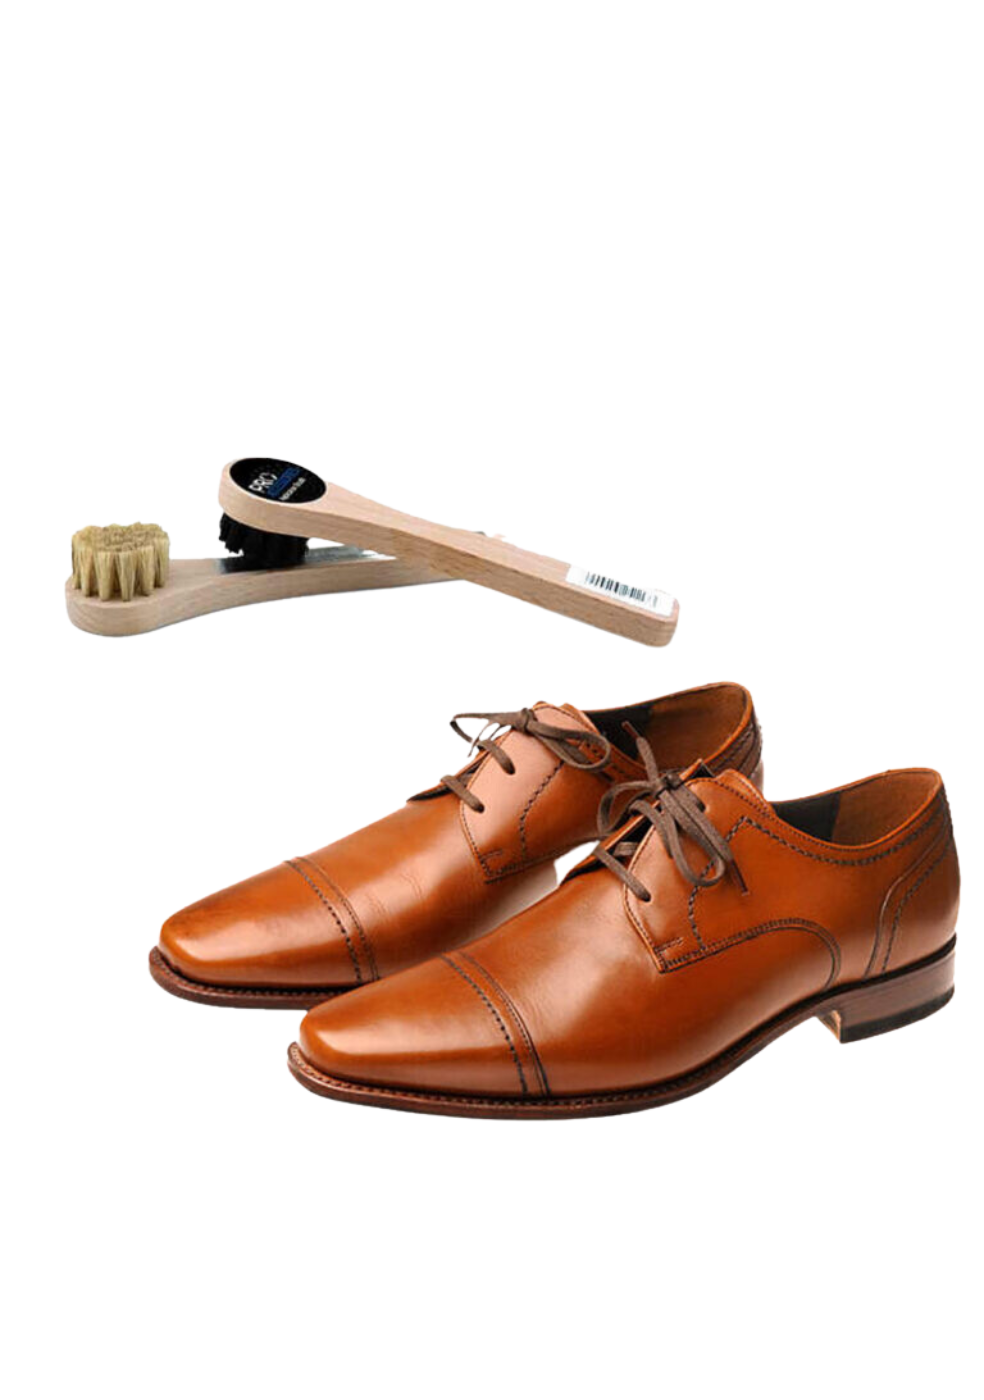 Shoes Application Brush